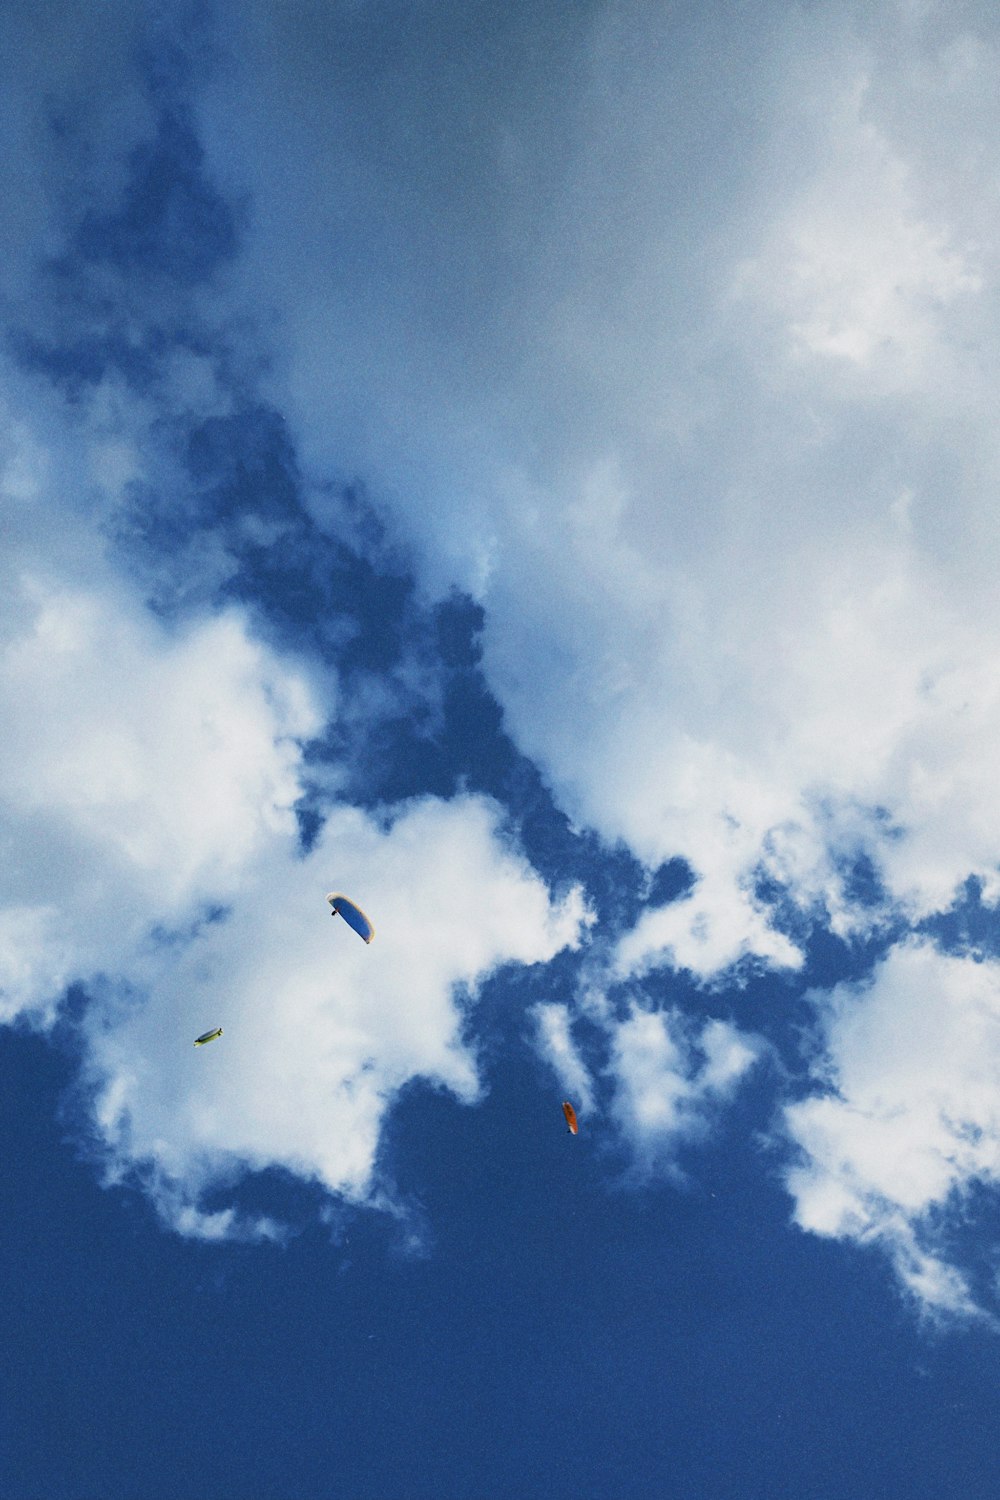 a group of kites flying through a cloudy blue sky